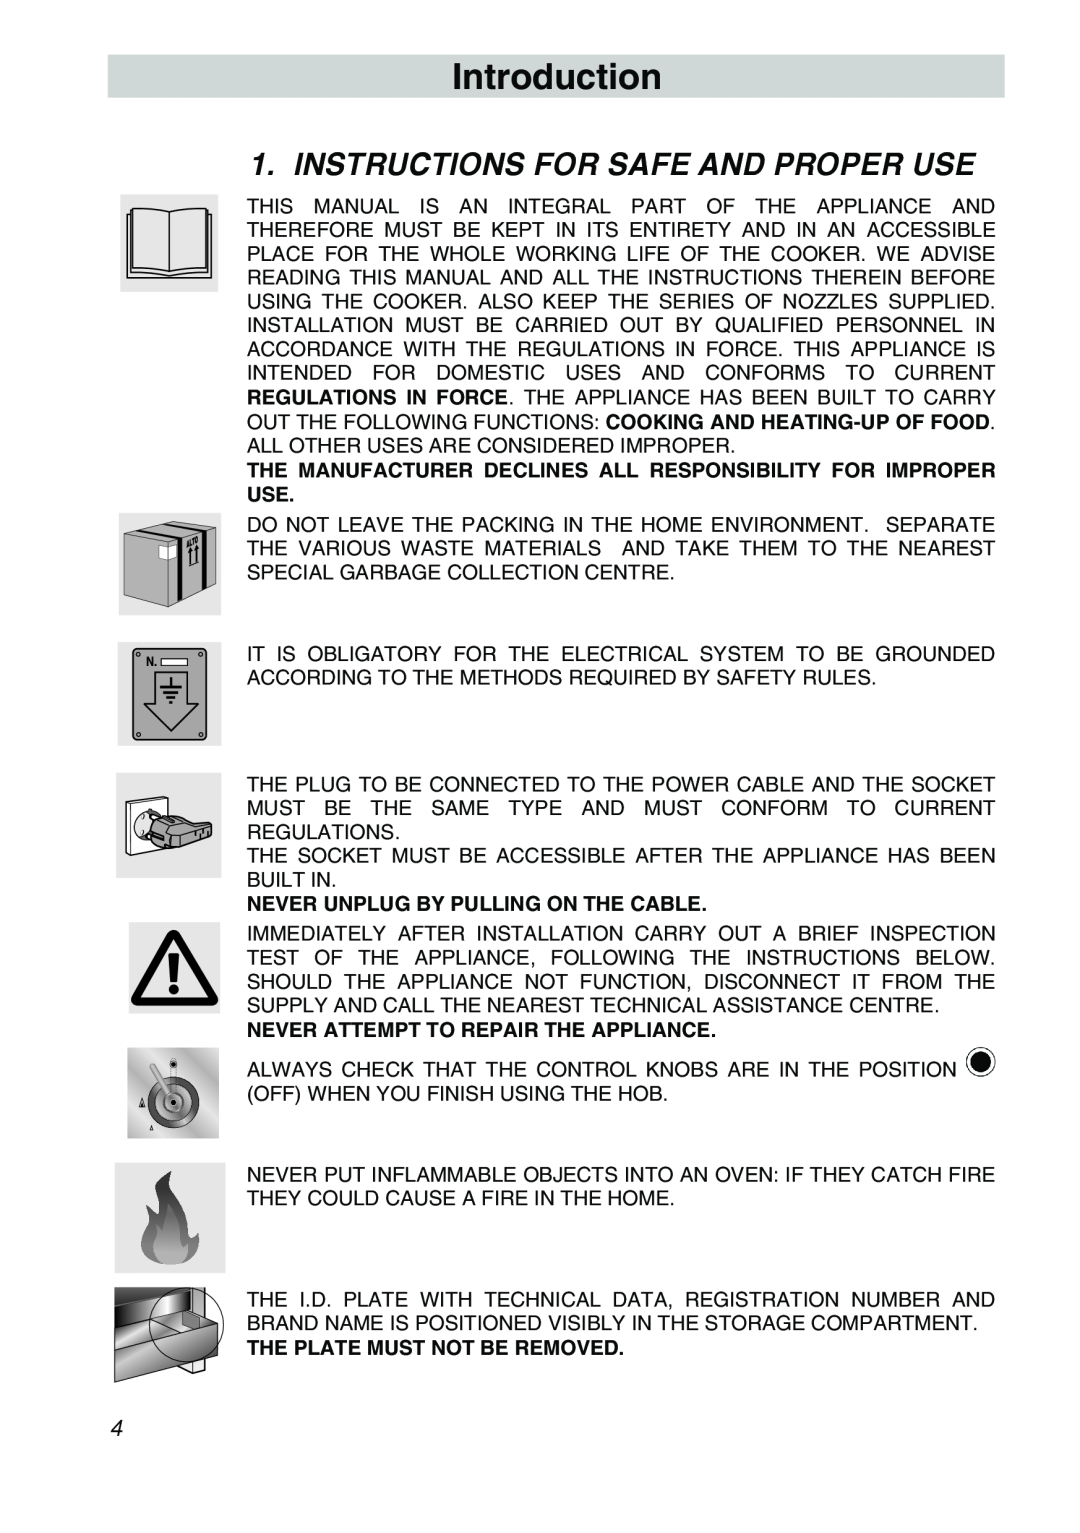 Smeg A21X-5 manual Introduction, Instructions For Safe And Proper Use, Never Unplug By Pulling On The Cable 